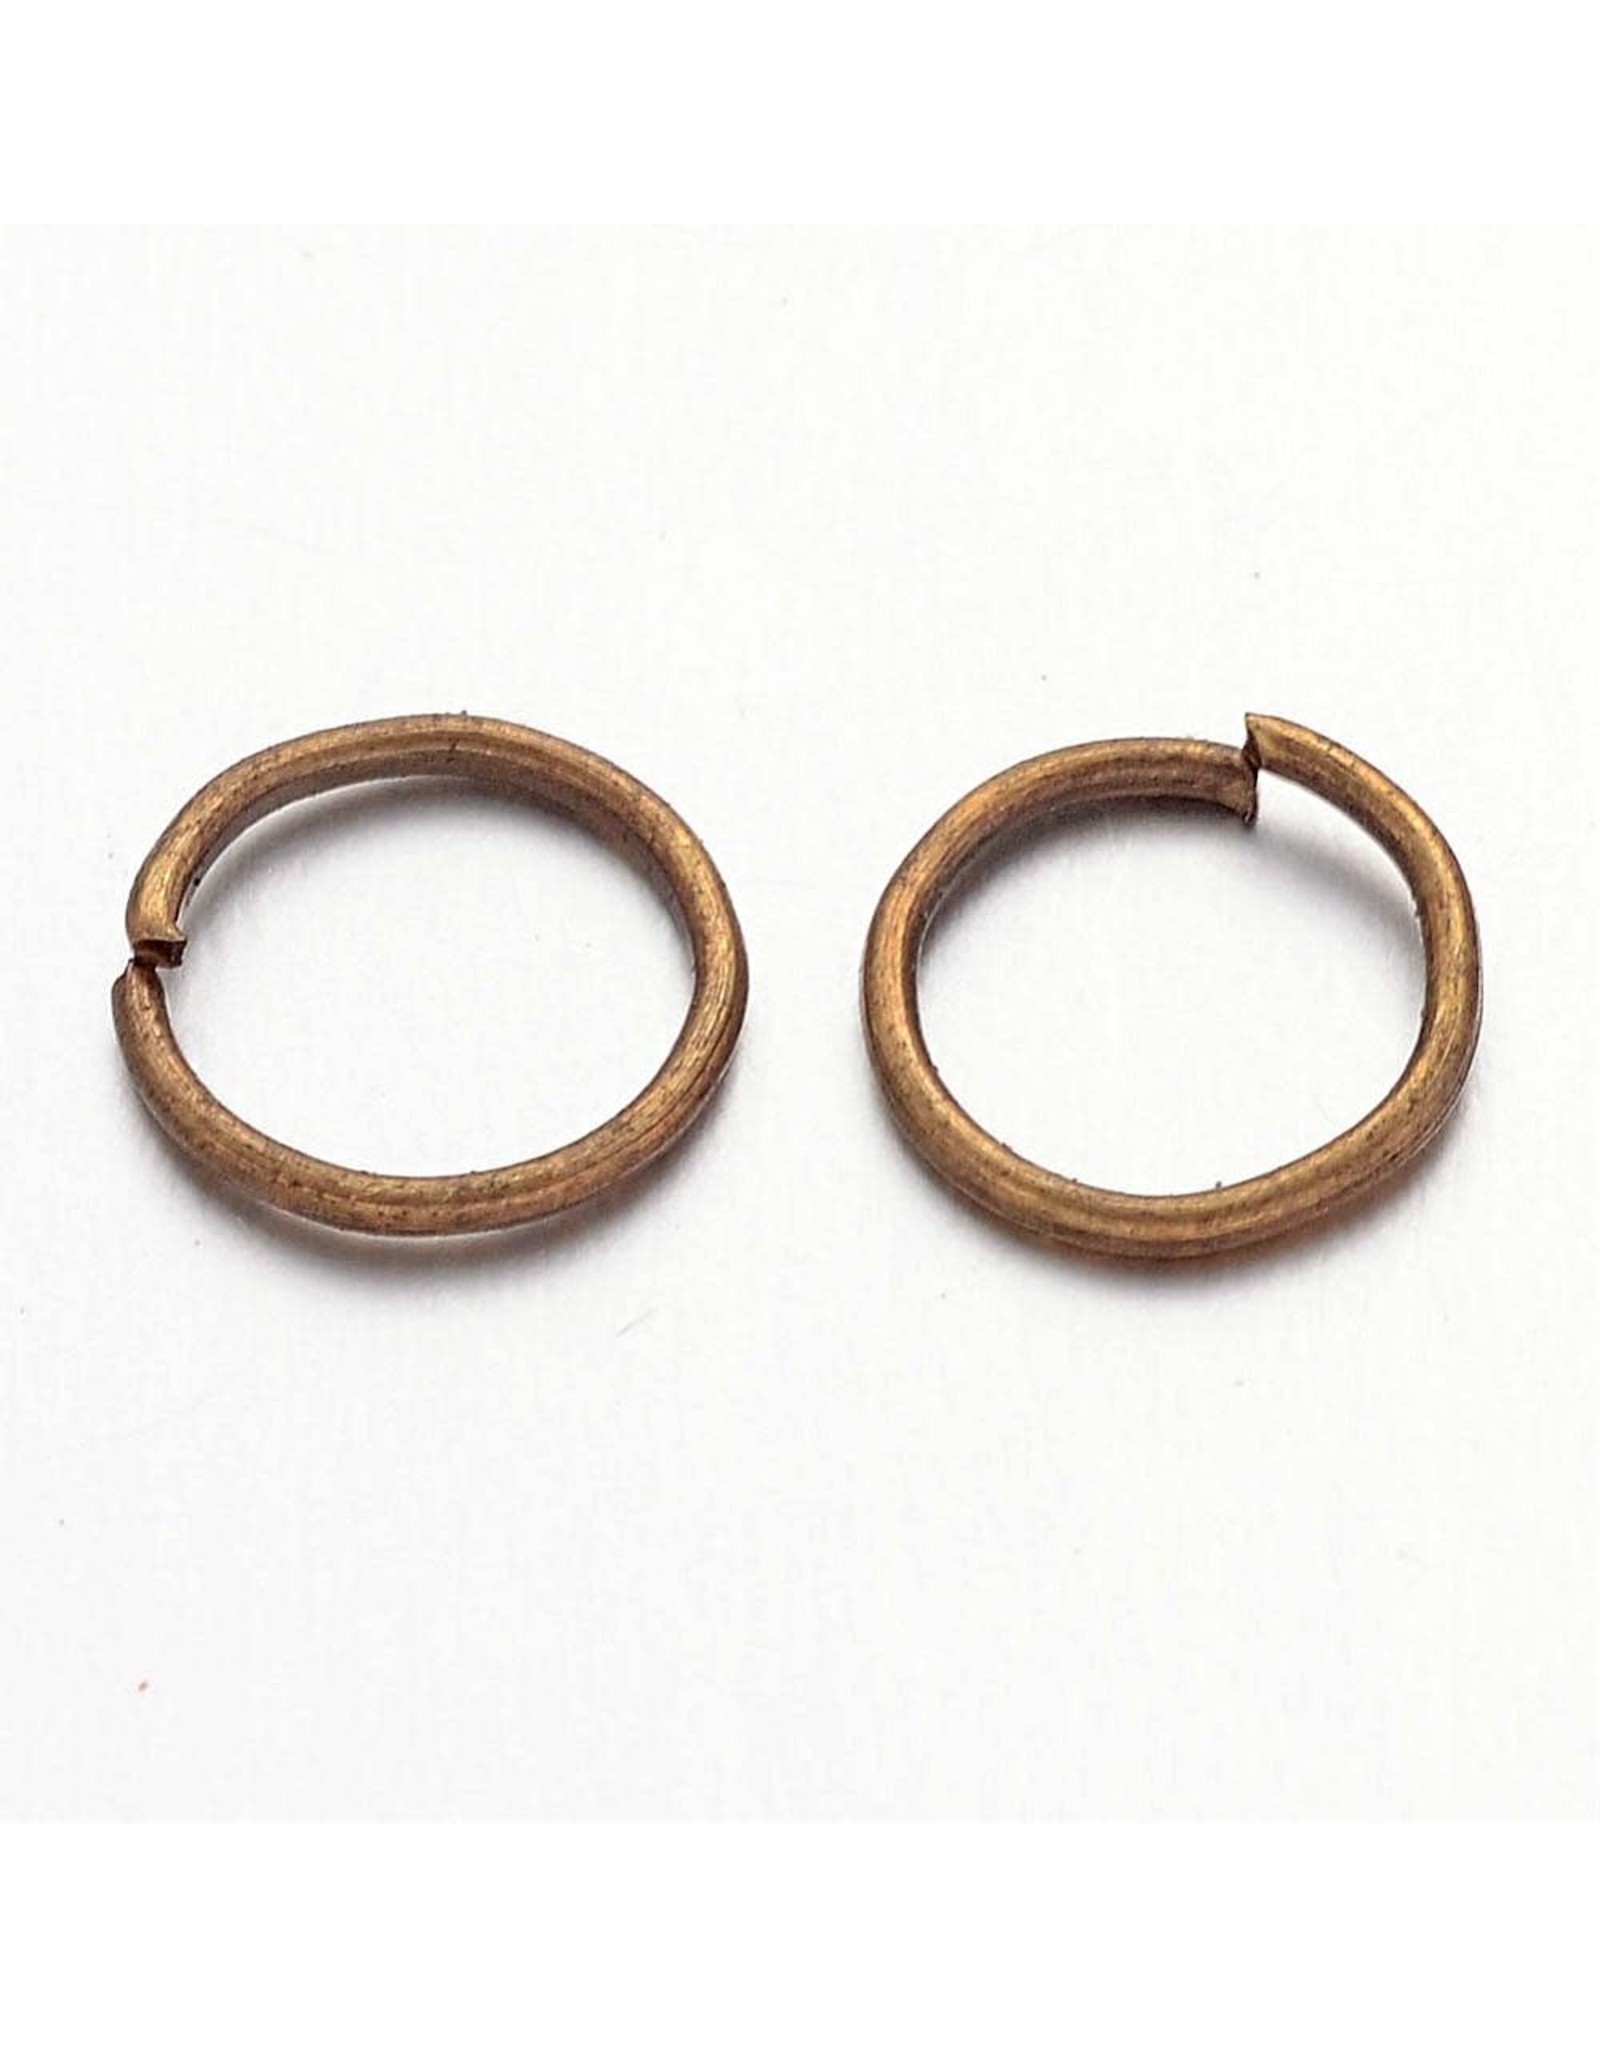 Jump Ring 7mm Antique Brass  approx 20g  x100 NF